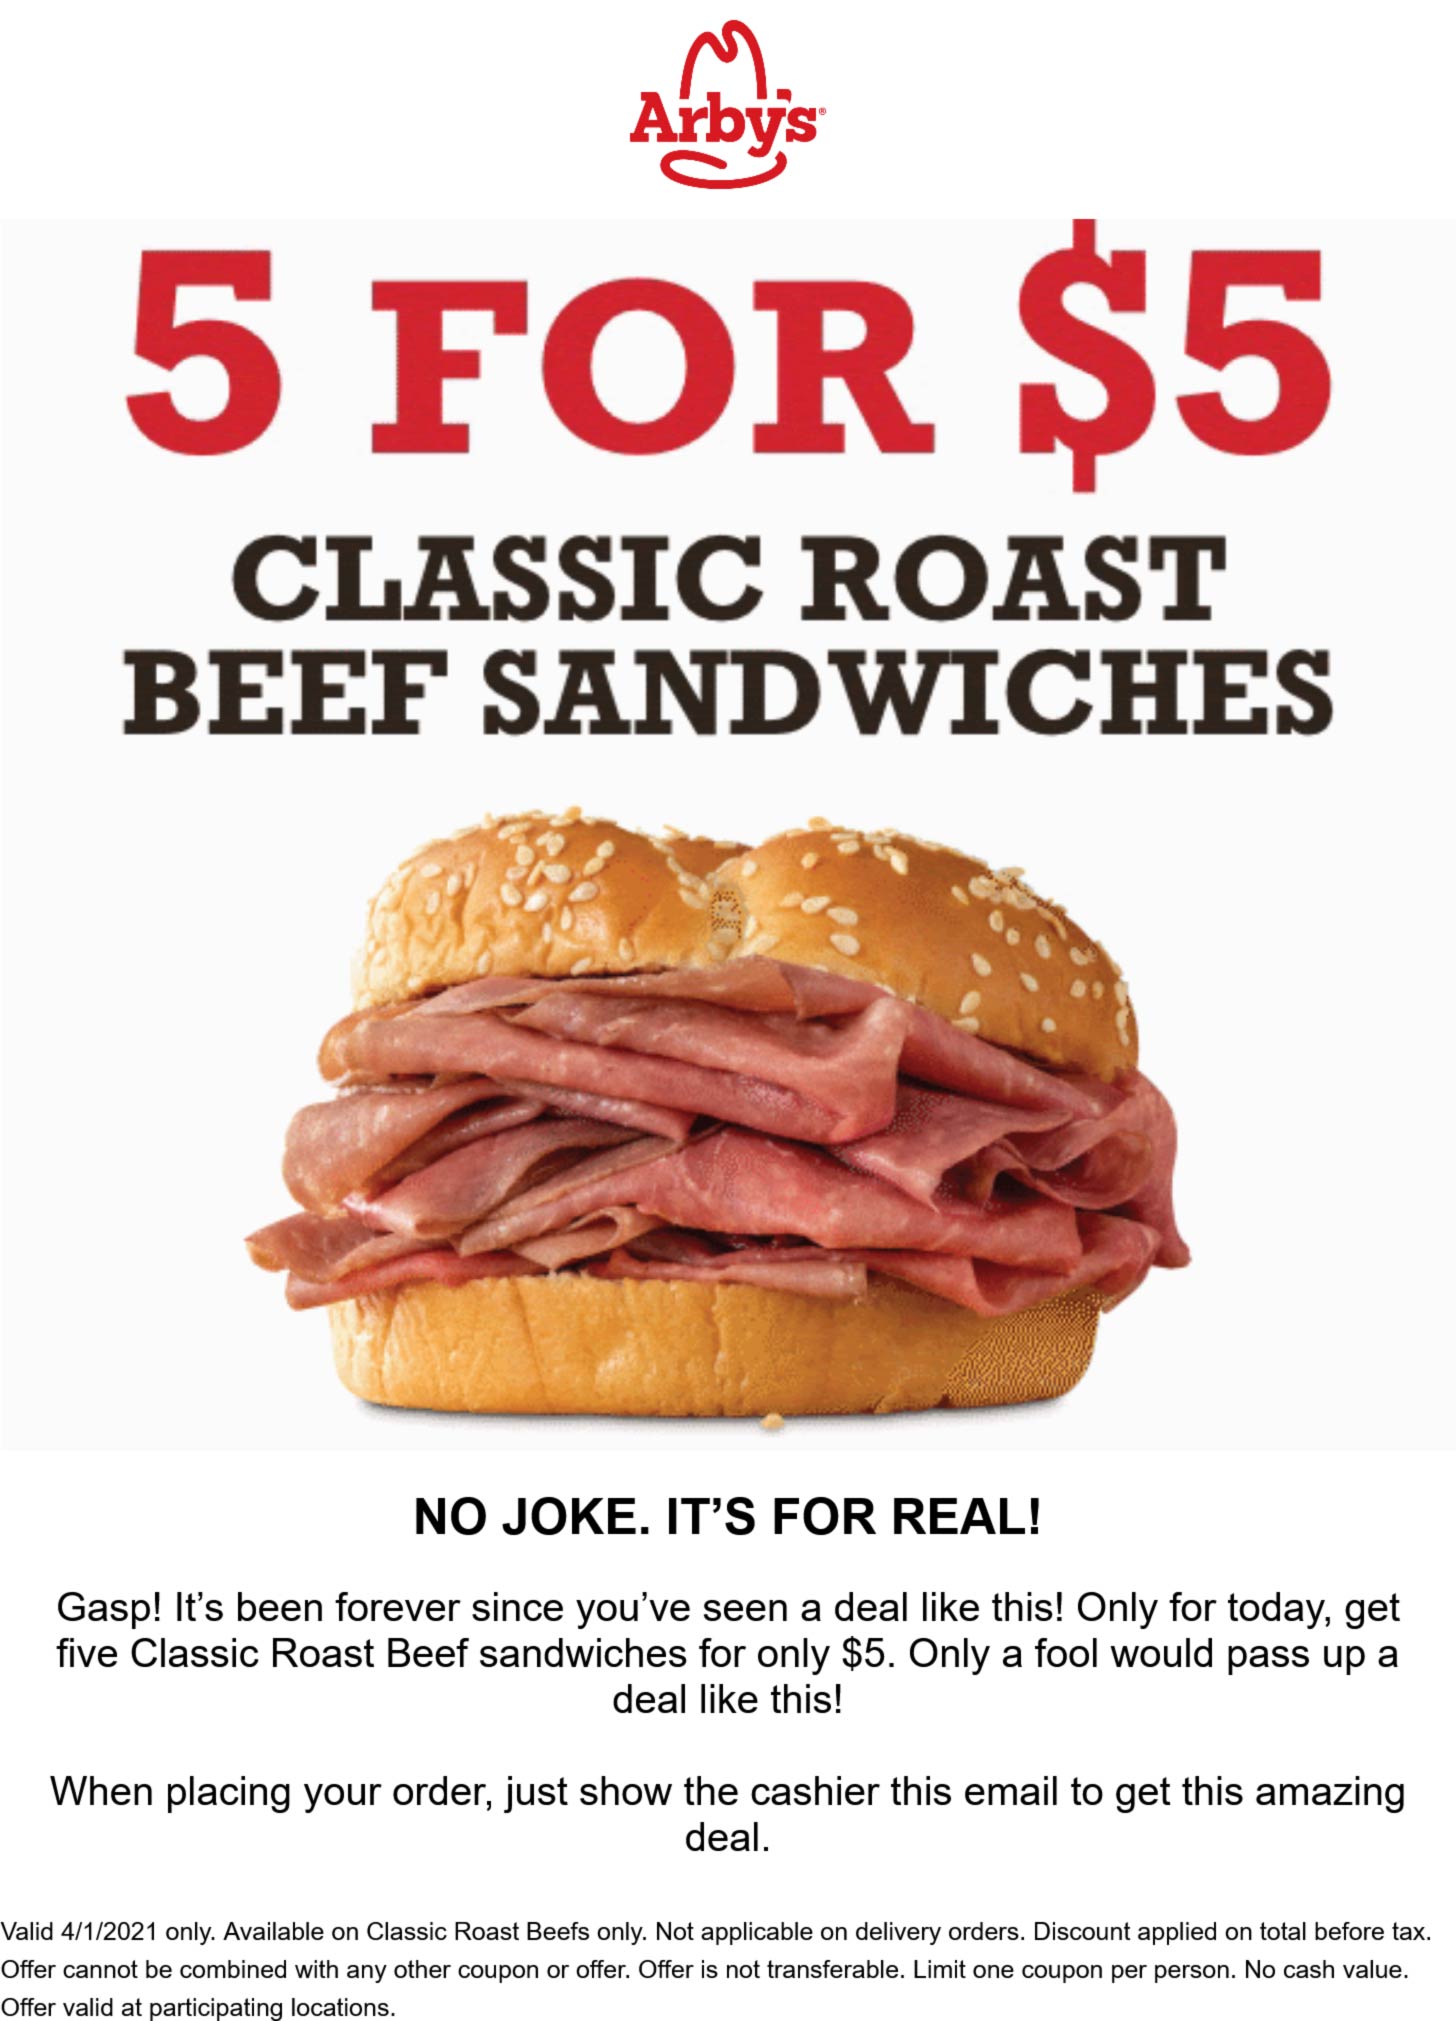 5-roast-beef-sandwiches-for-5-today-at-arbys-arbys-the-coupons-app